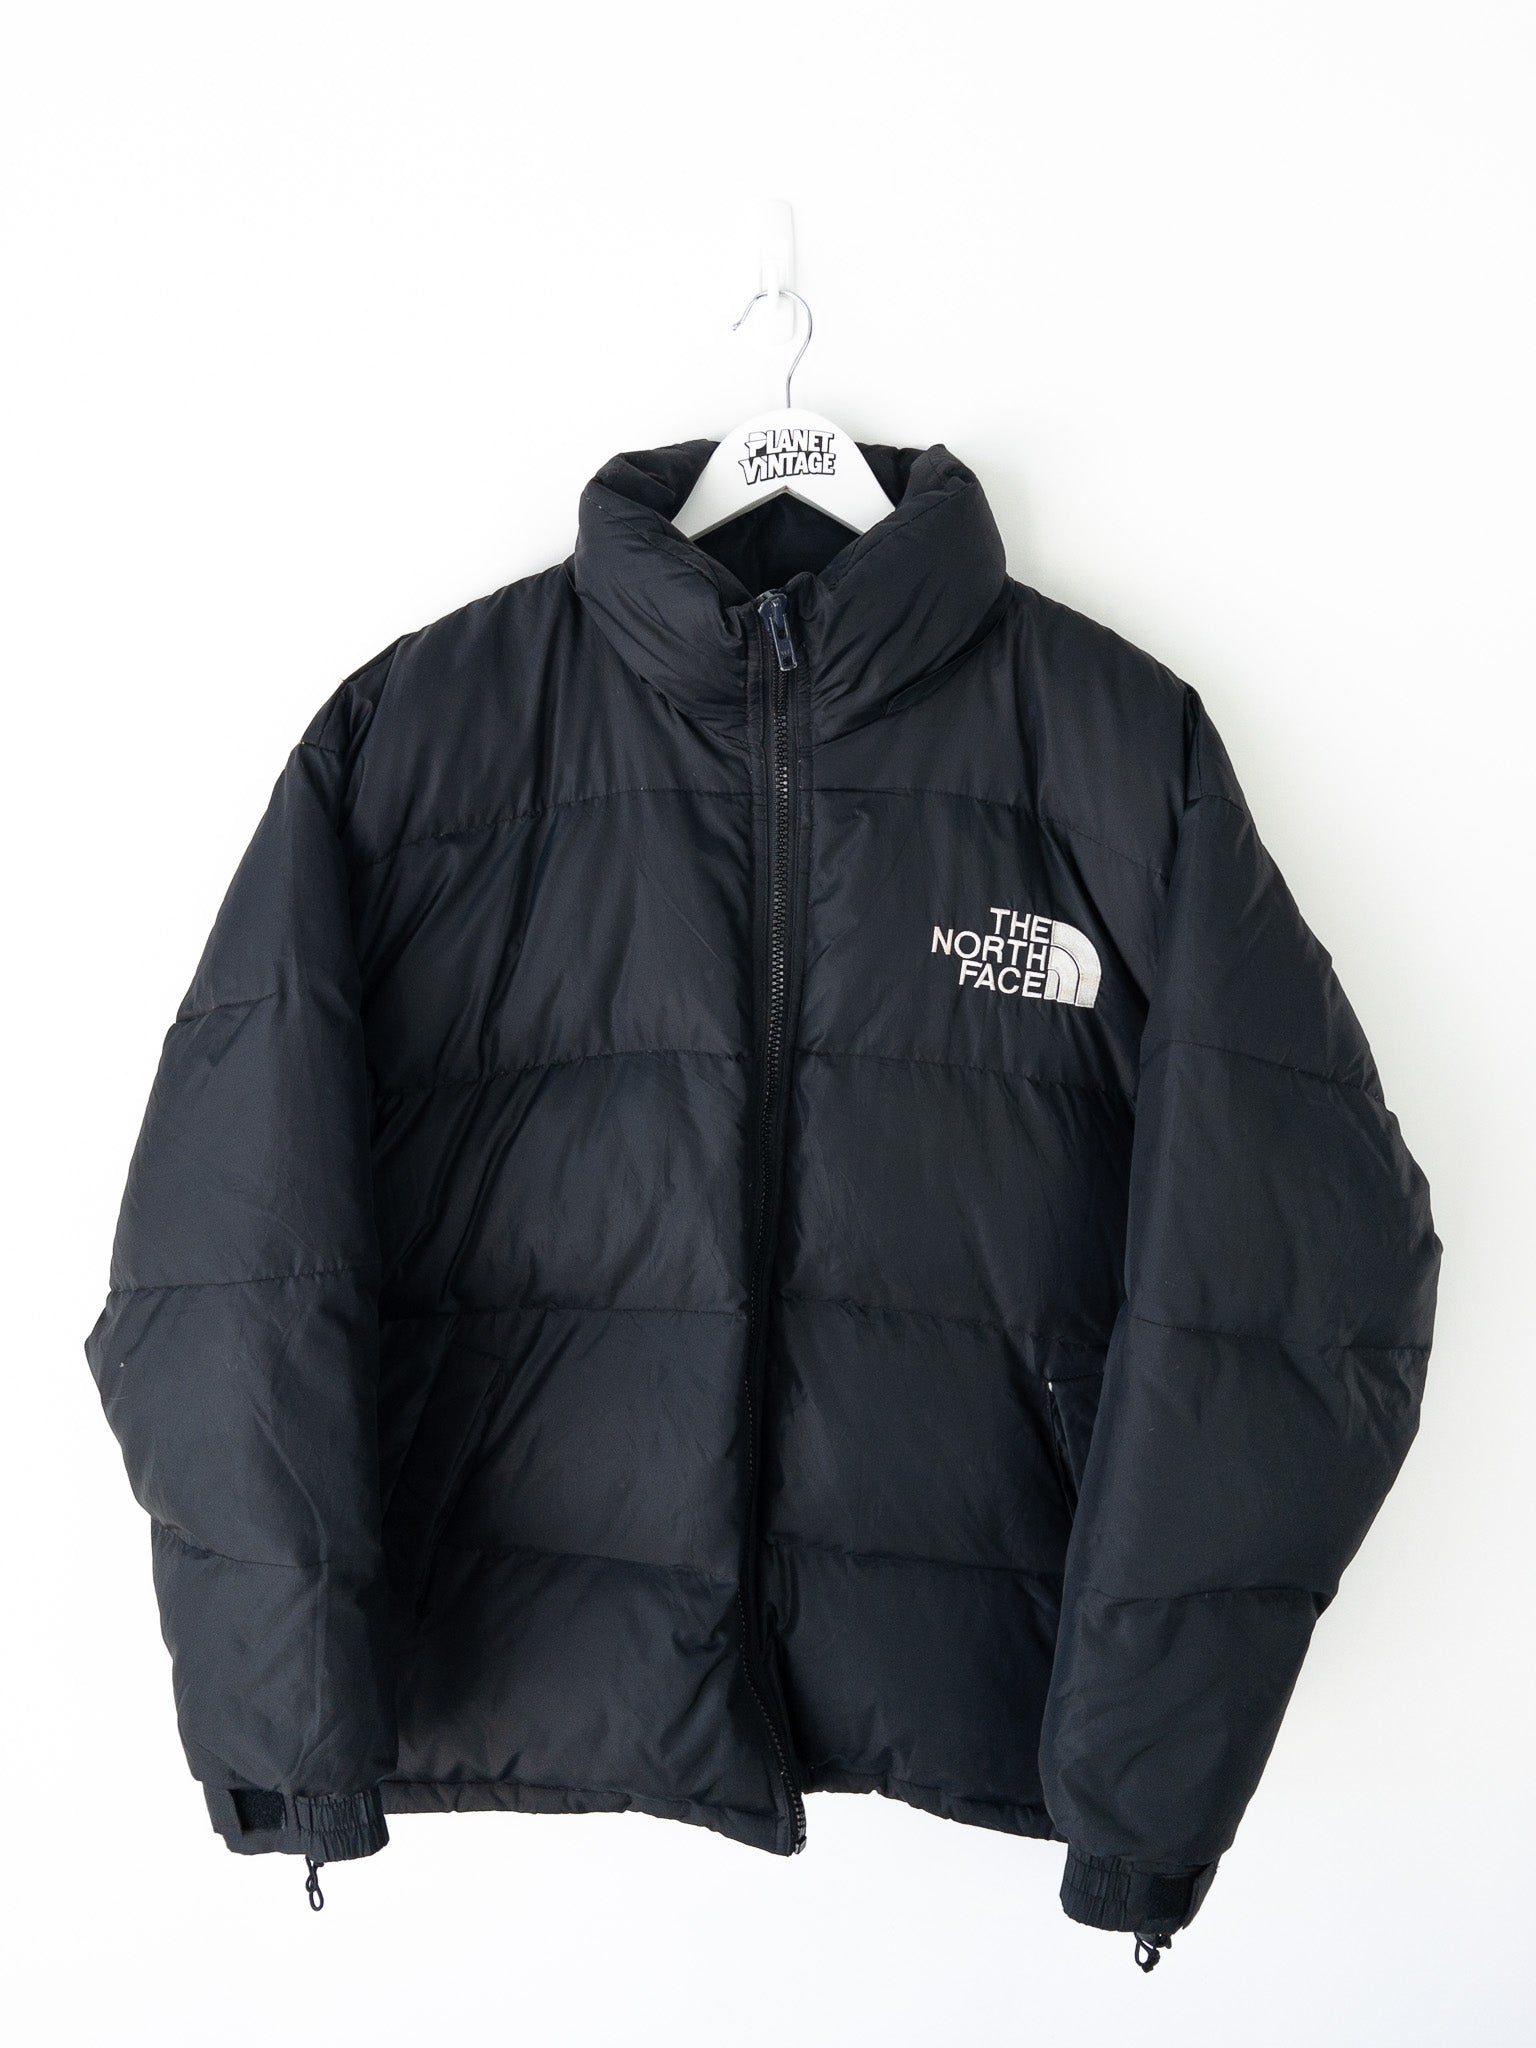 Vintage The North Face Puffer Jacket (XL)